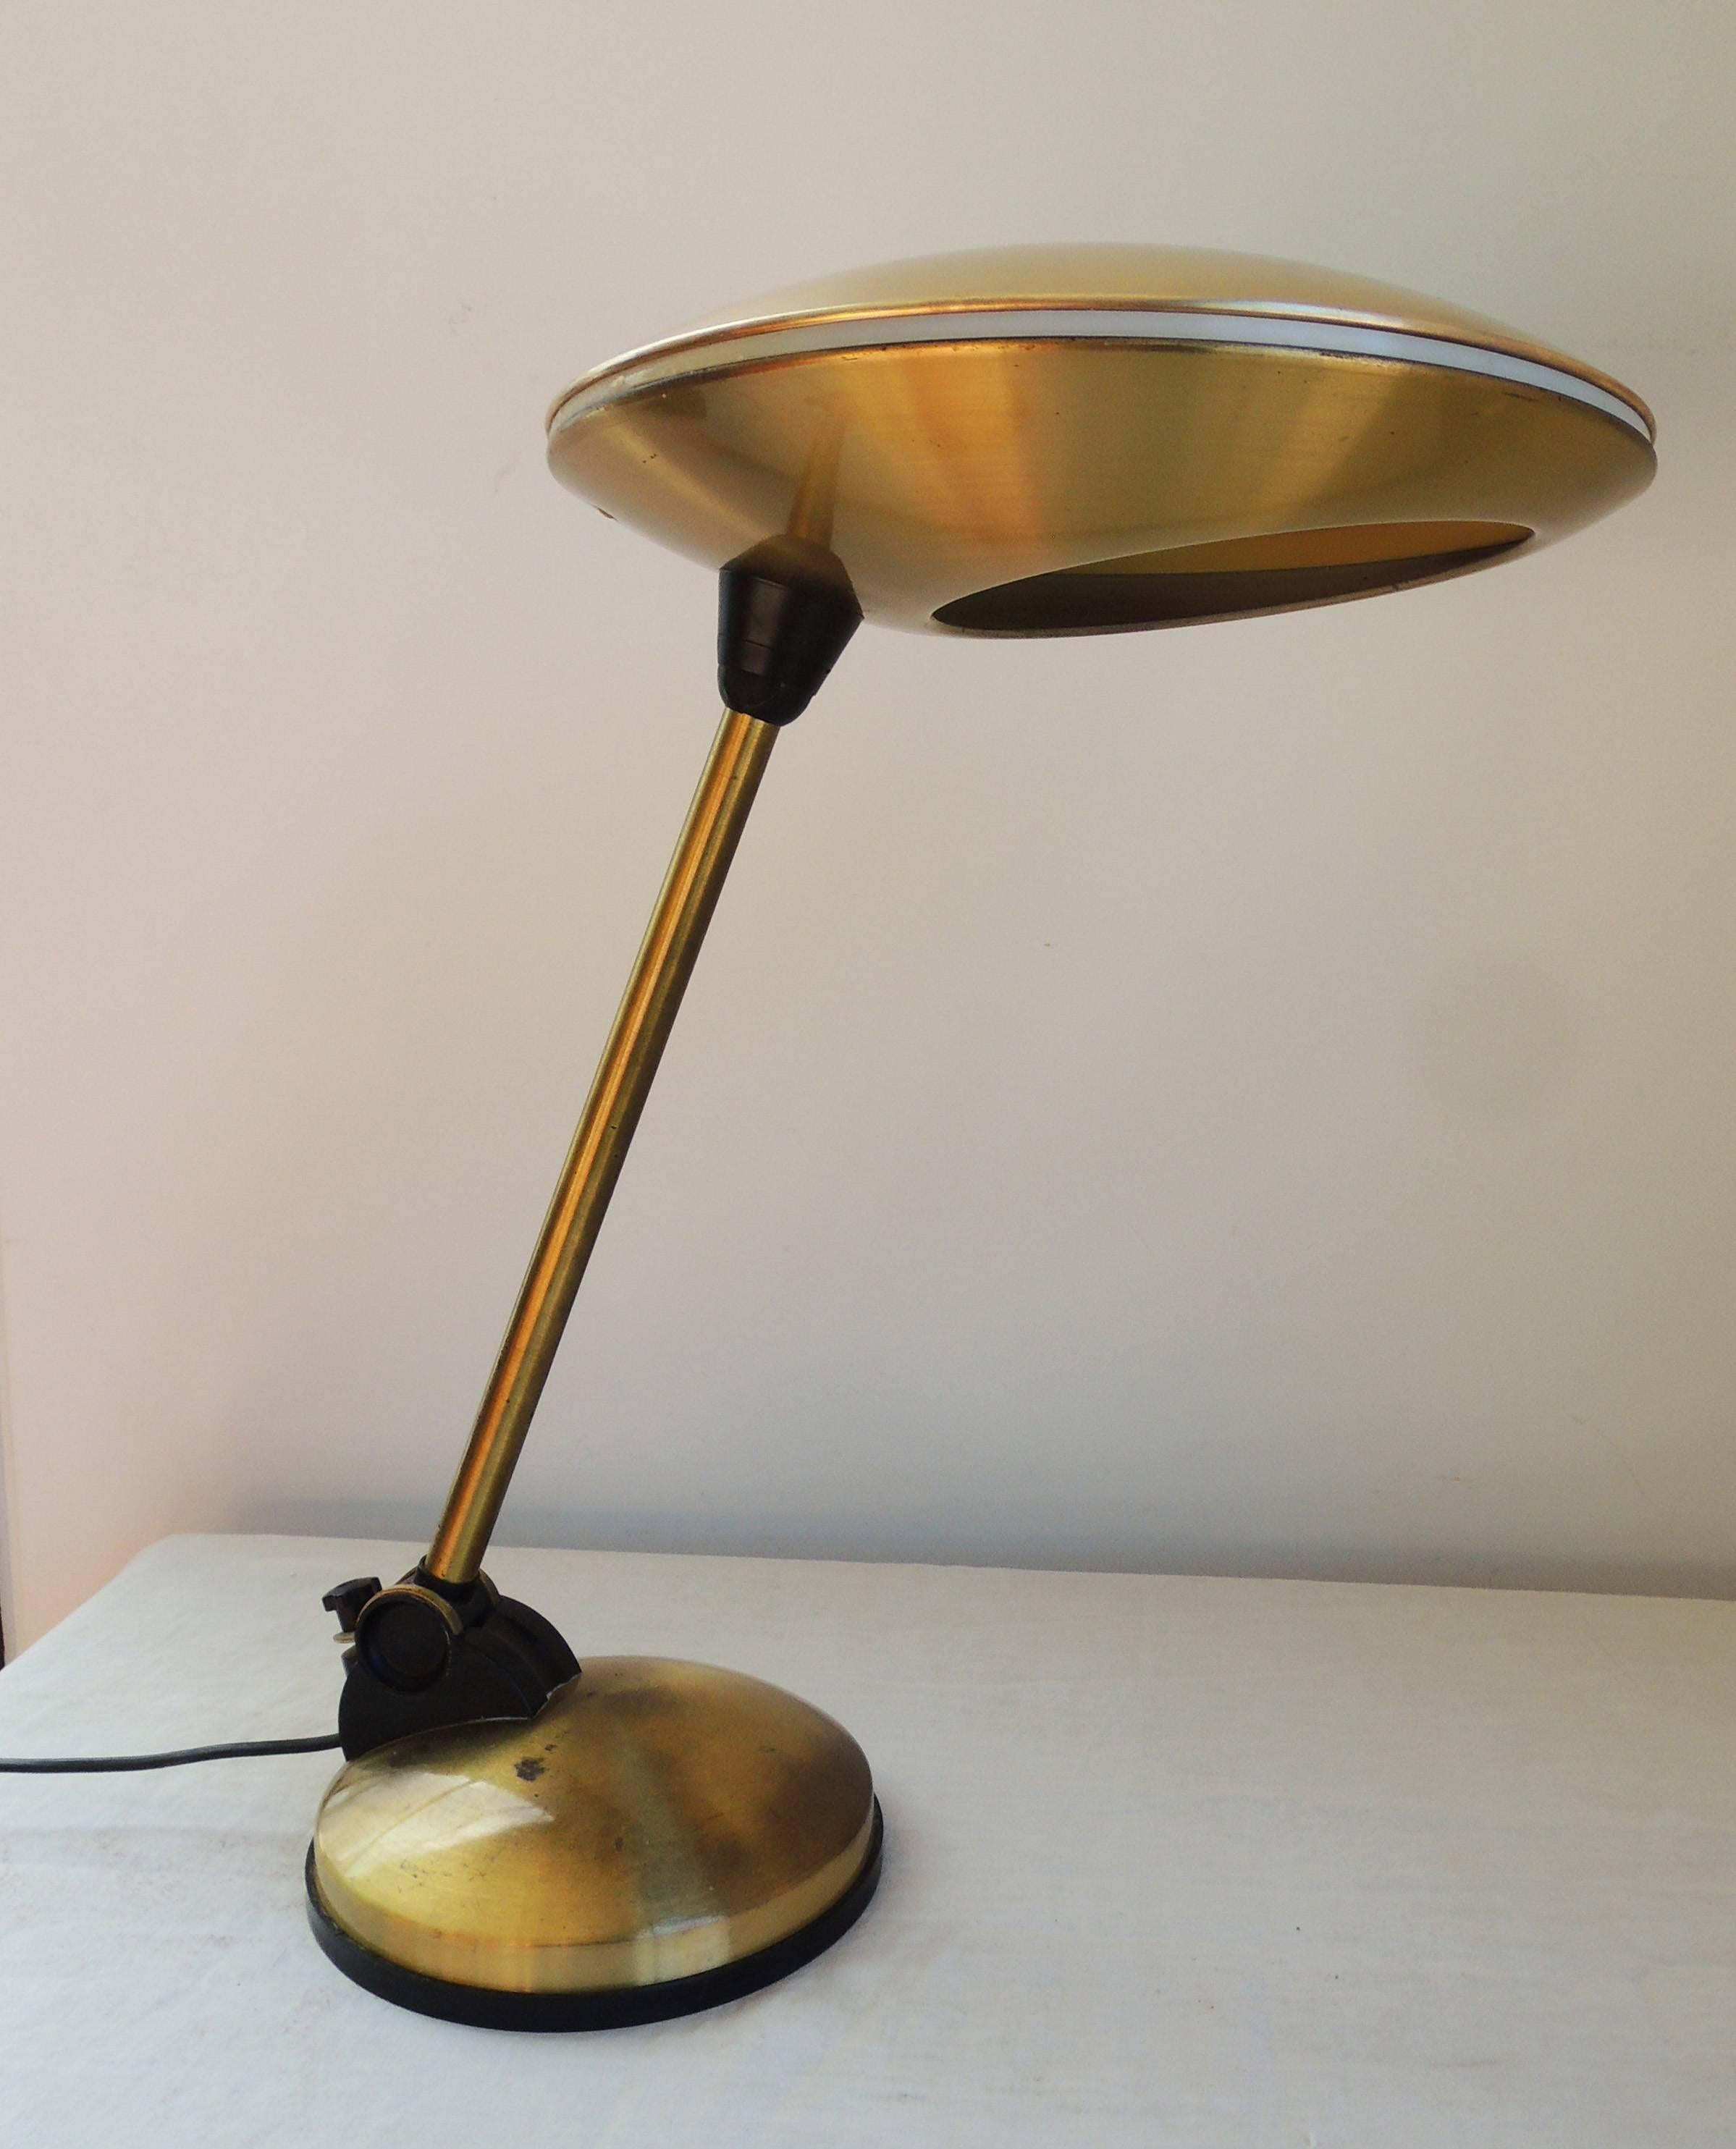 Cool flying saucer articulated table lamp of brass and black plastic.
The brass has a warm patina. Distinctive and unusual.
Not marked. Originally European wiring. (rewired.)
The top disc is 34 cm. The bottom disc is 20 cm.